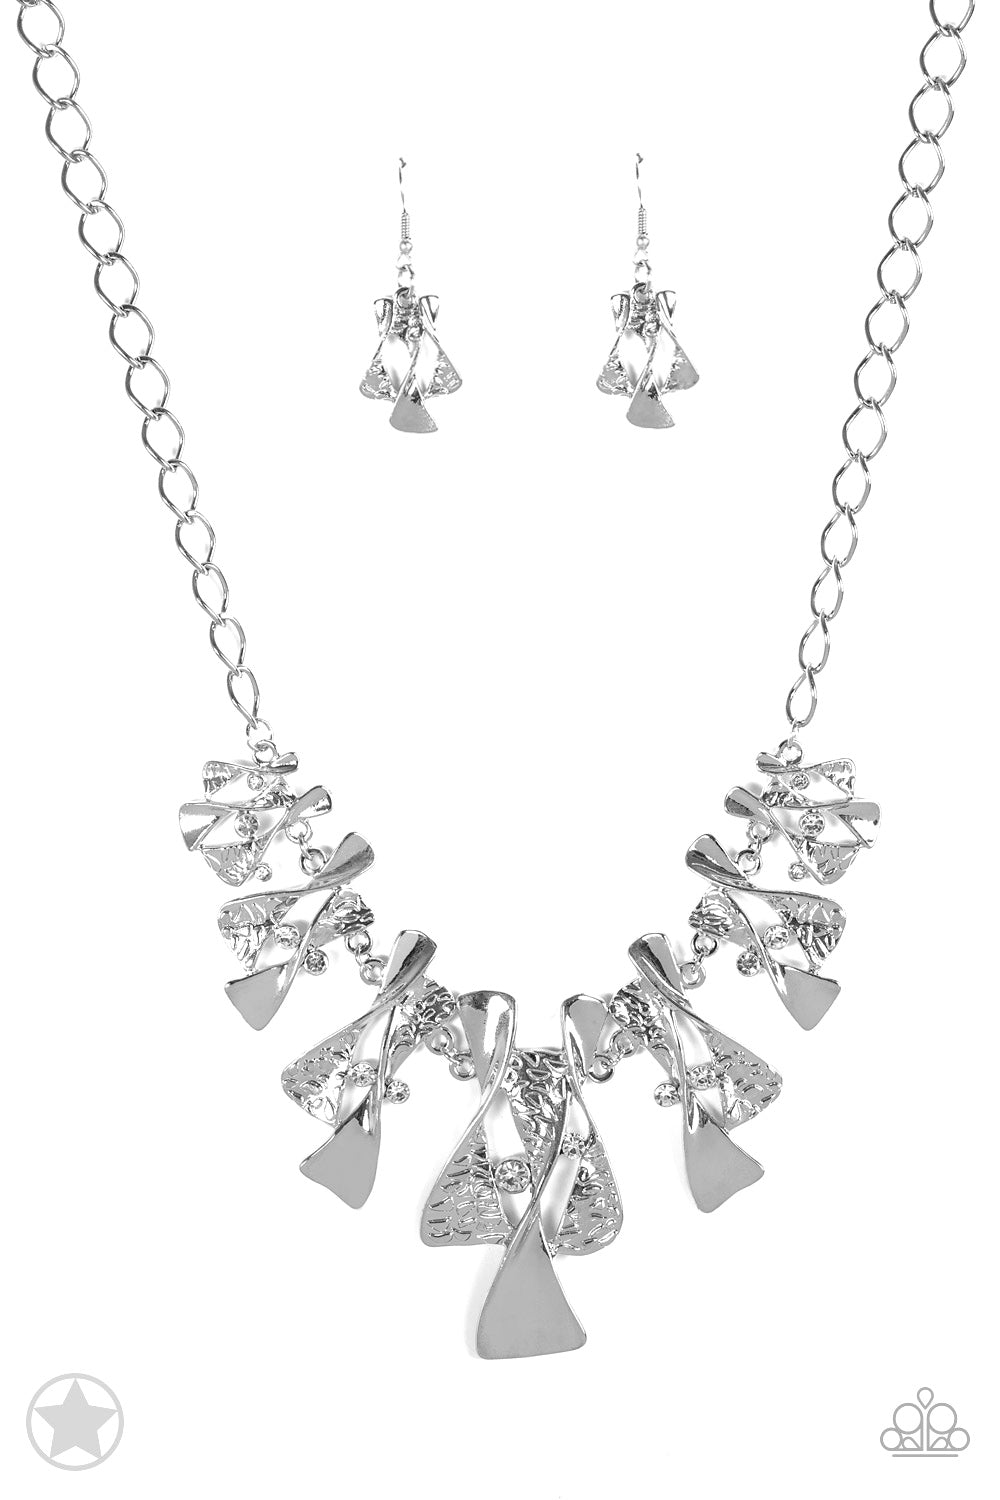 Paparazzi Necklace Blockbuster - The Sands of Time - Silver